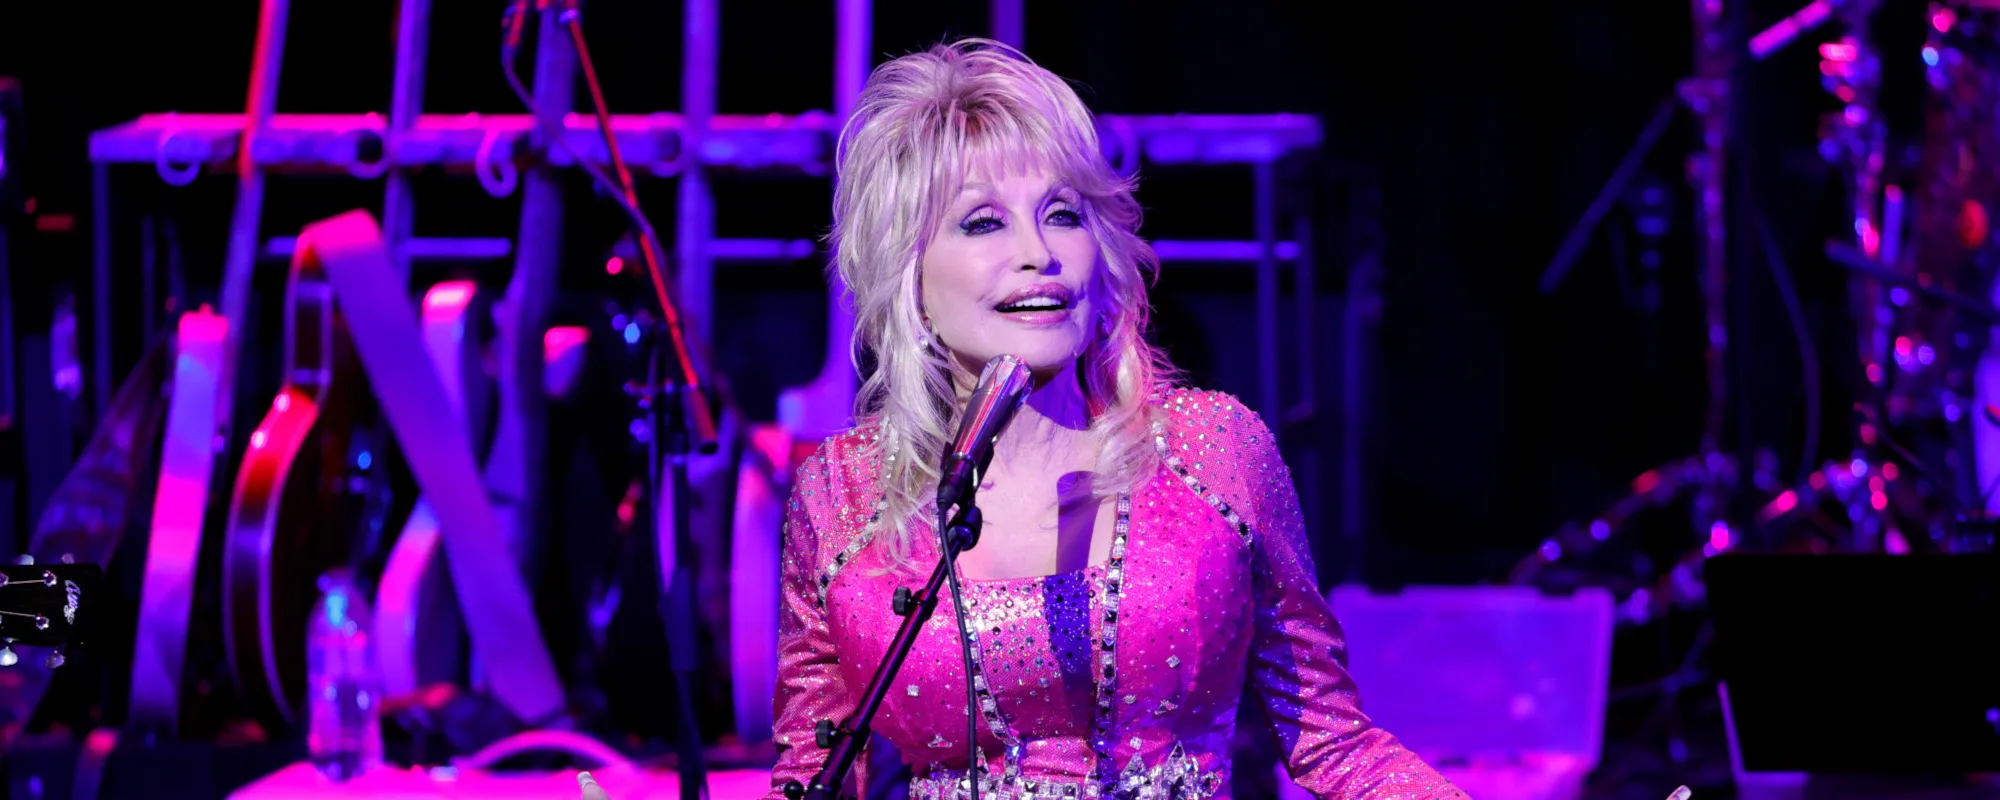 Dolly Parton’s Greatest Quotes and “Dollyisms”